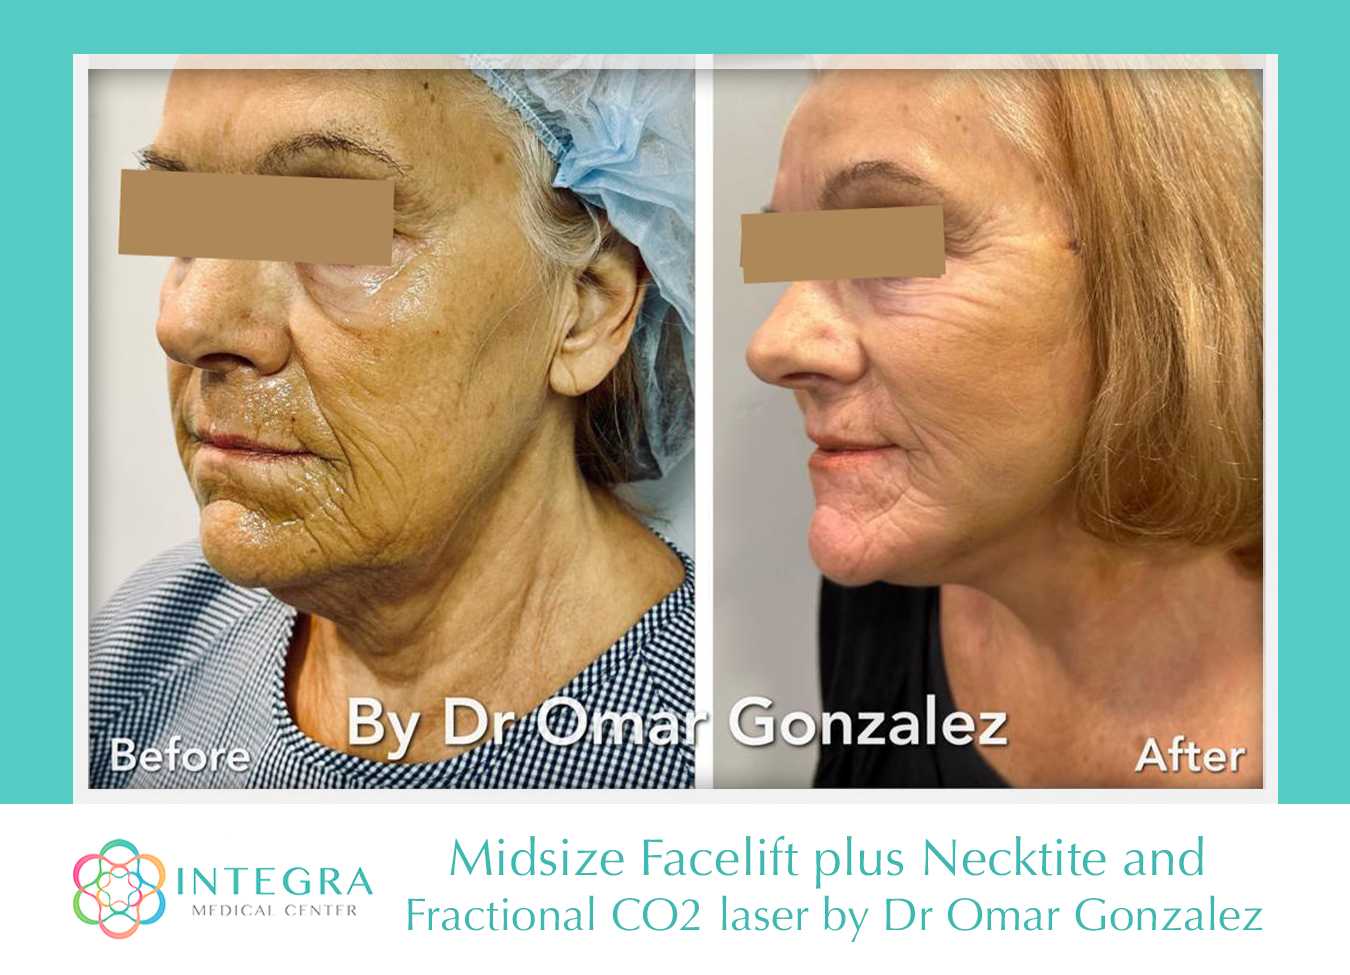 Before After - Midsize Facelift plus Necktite and Fractional CO2 laser. By Dr. Omar Gonzalez at Integra Medical Center in Nuevo Progreso, Mexico